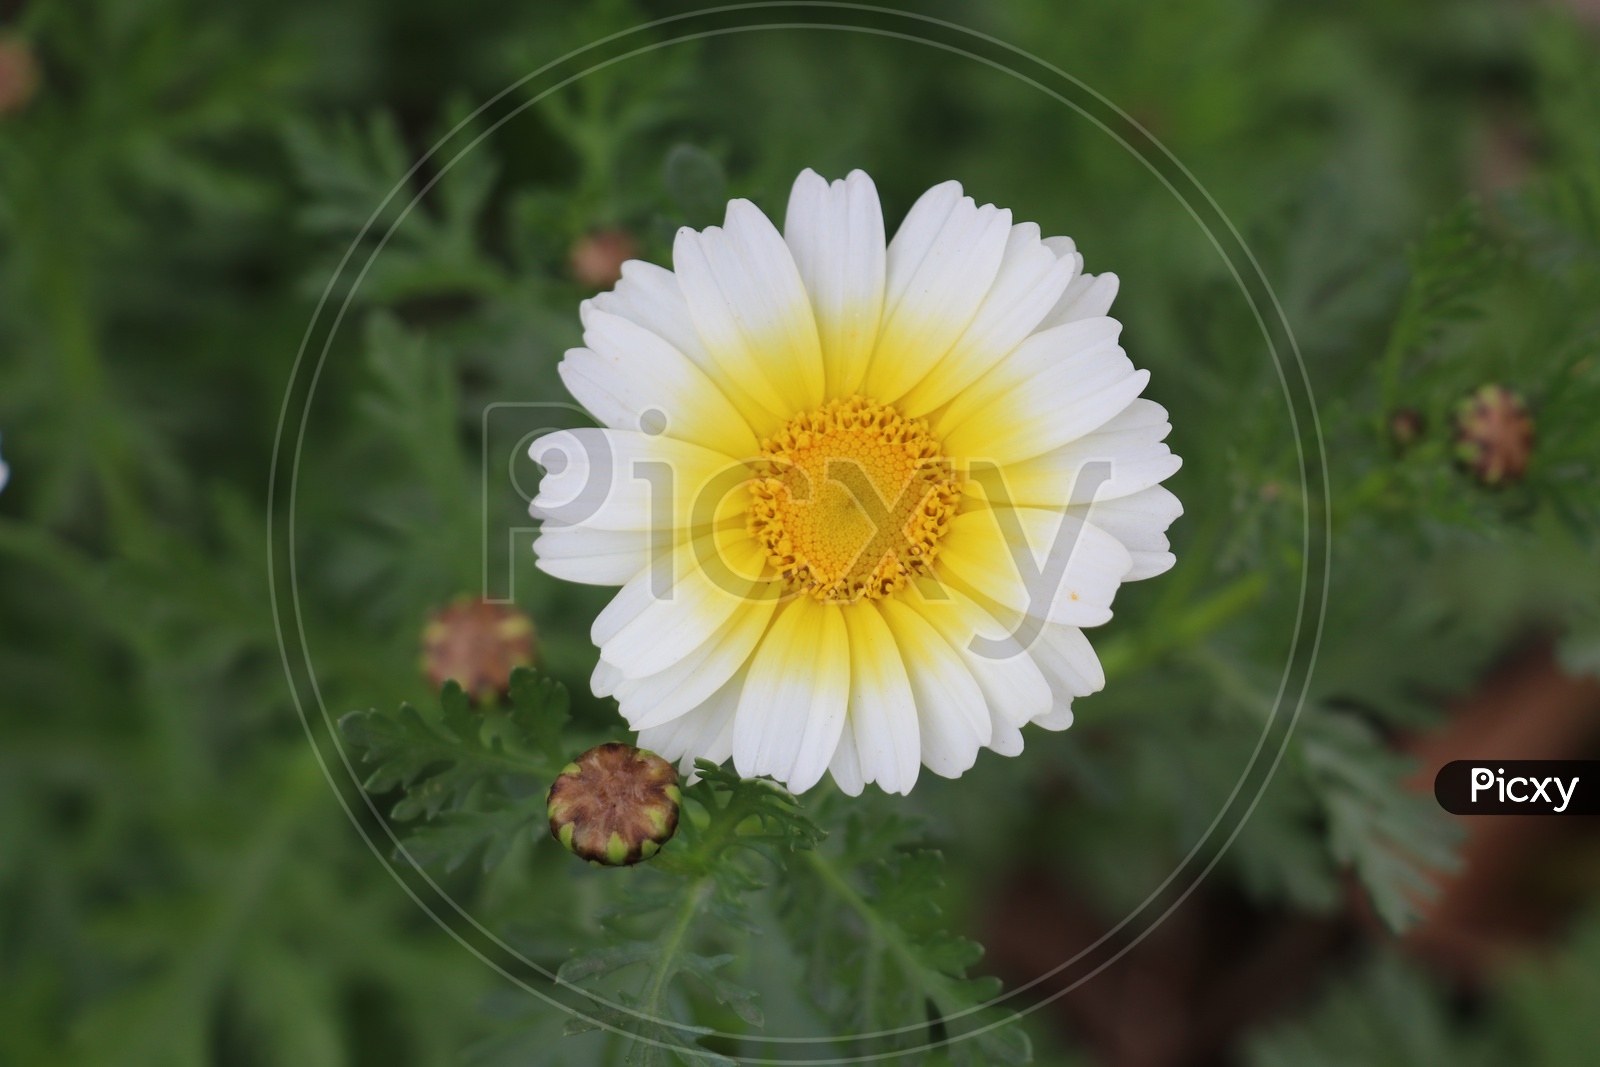 A white and yellow coloured flower